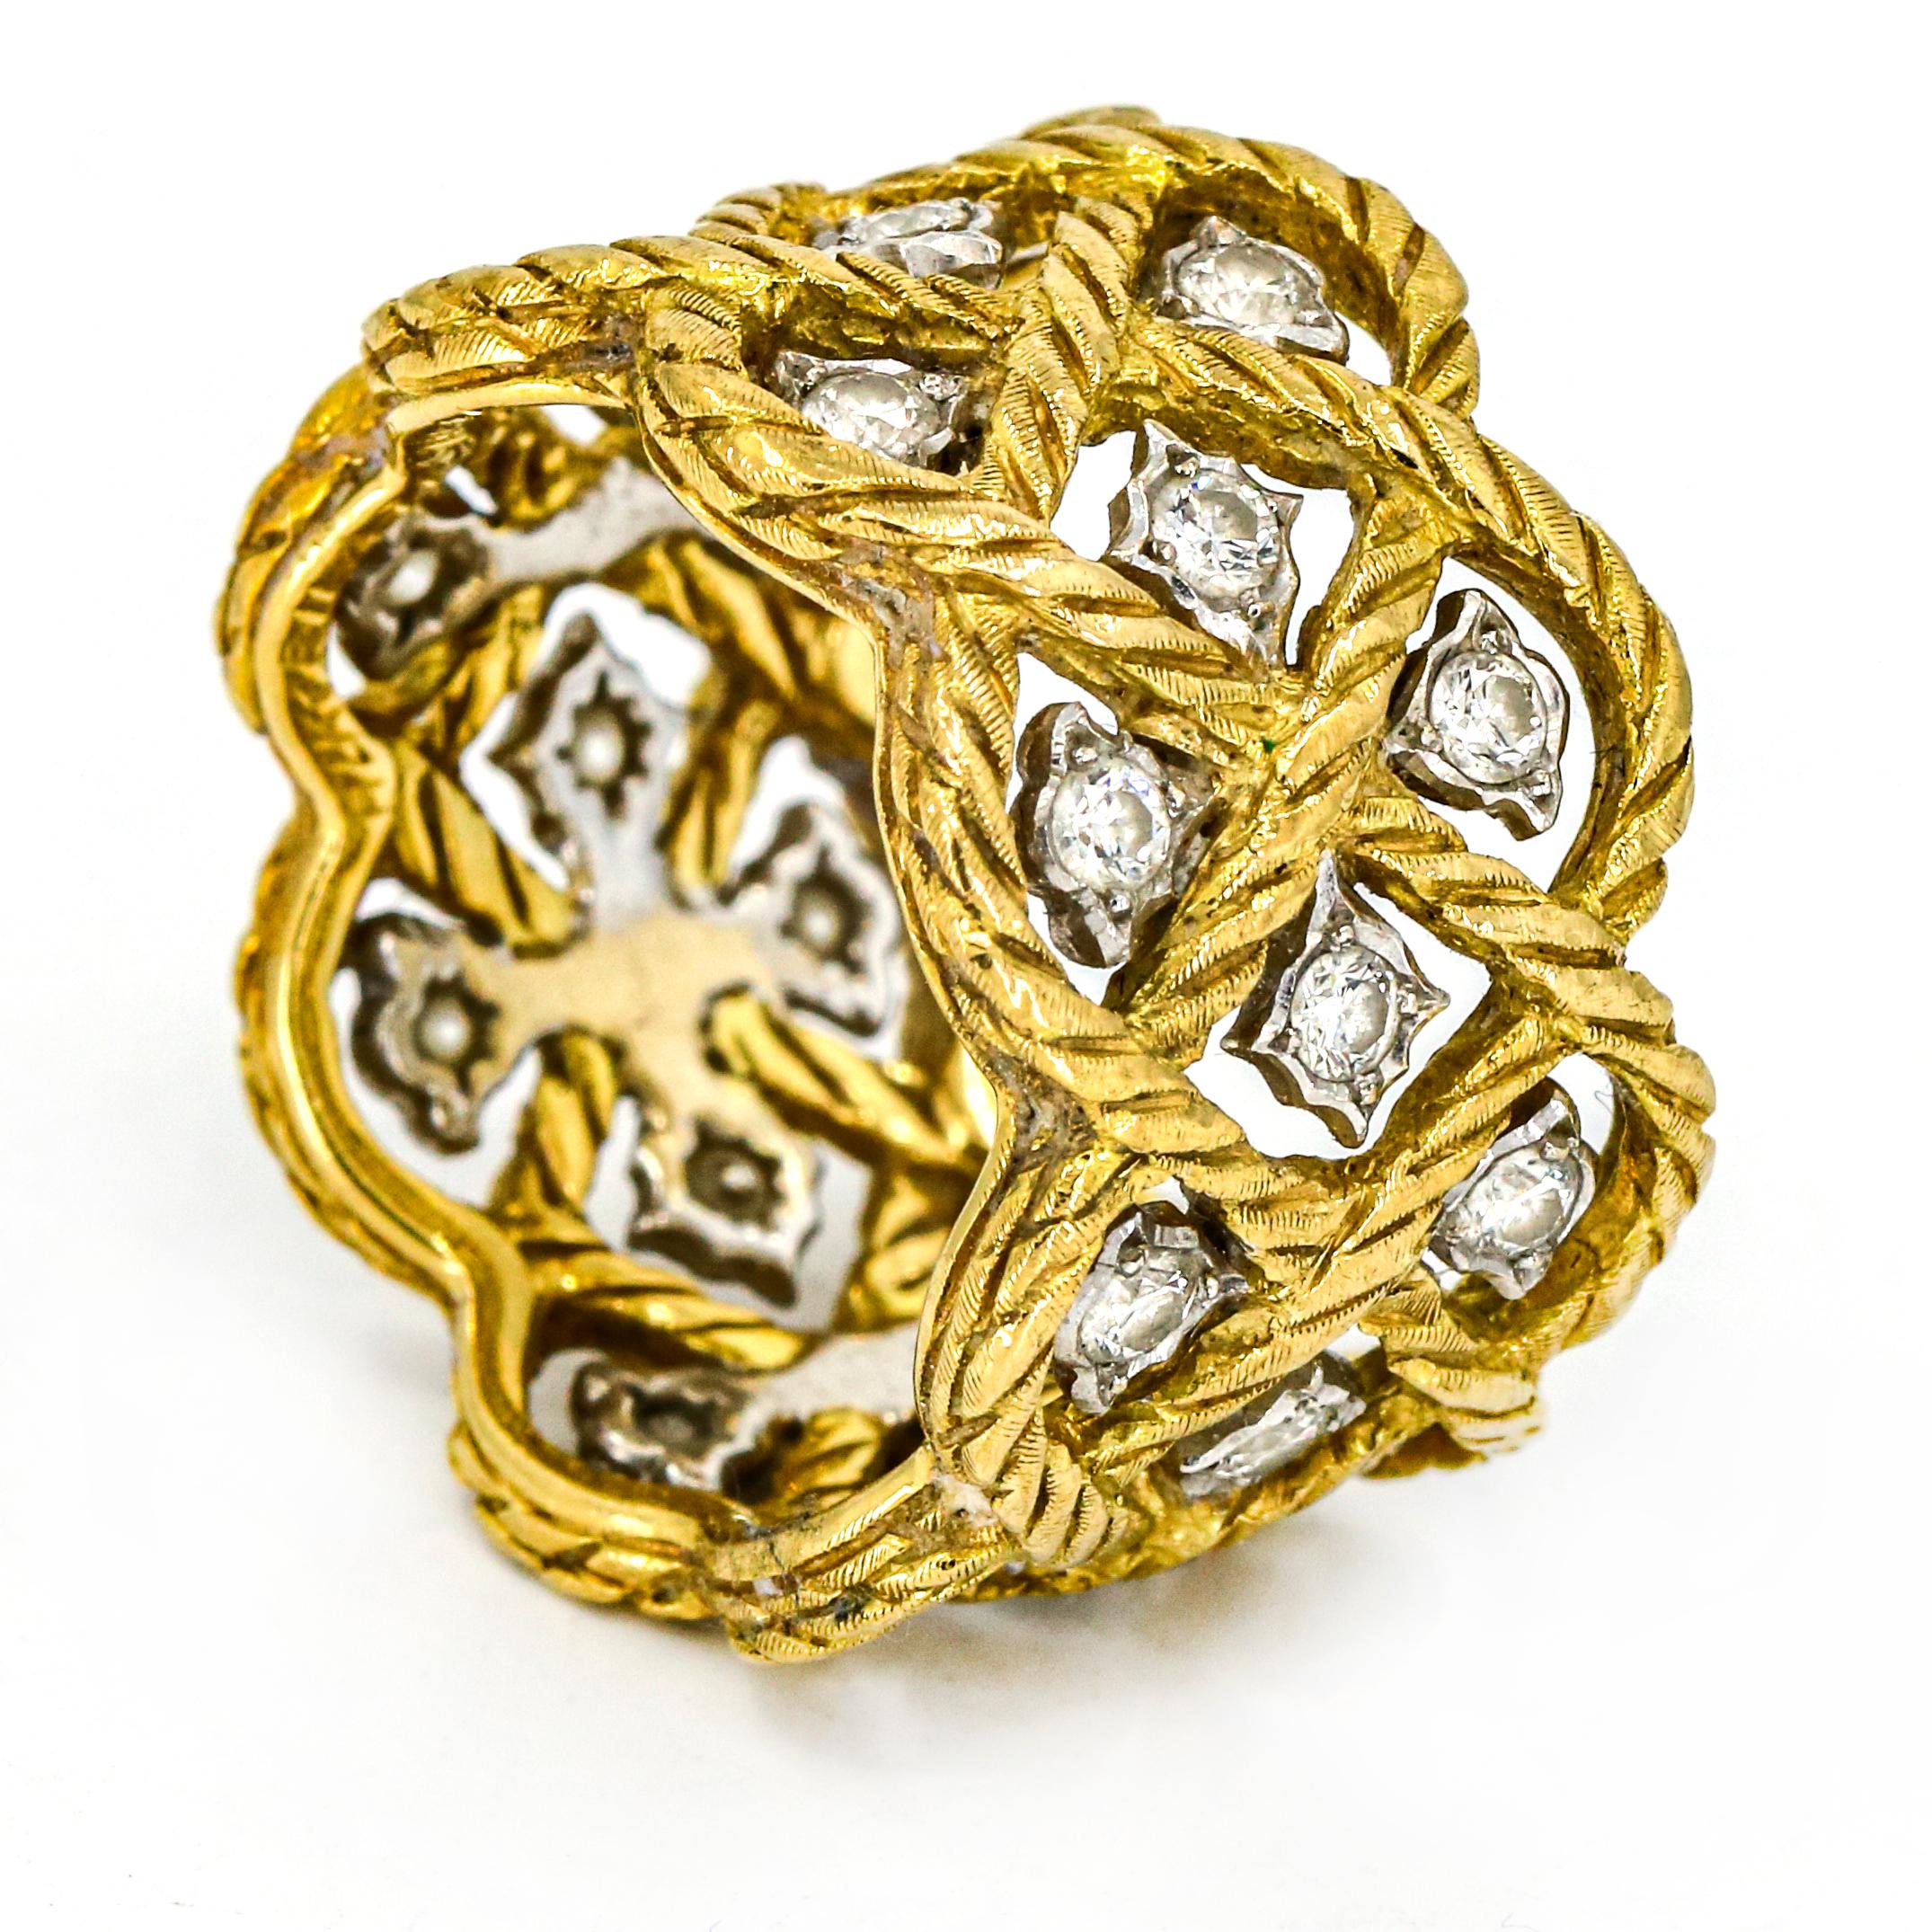 Bucellati 18 Karat Gold Etoilee Diamond Wide Band Ring In Excellent Condition For Sale In Fort Lauderdale, FL